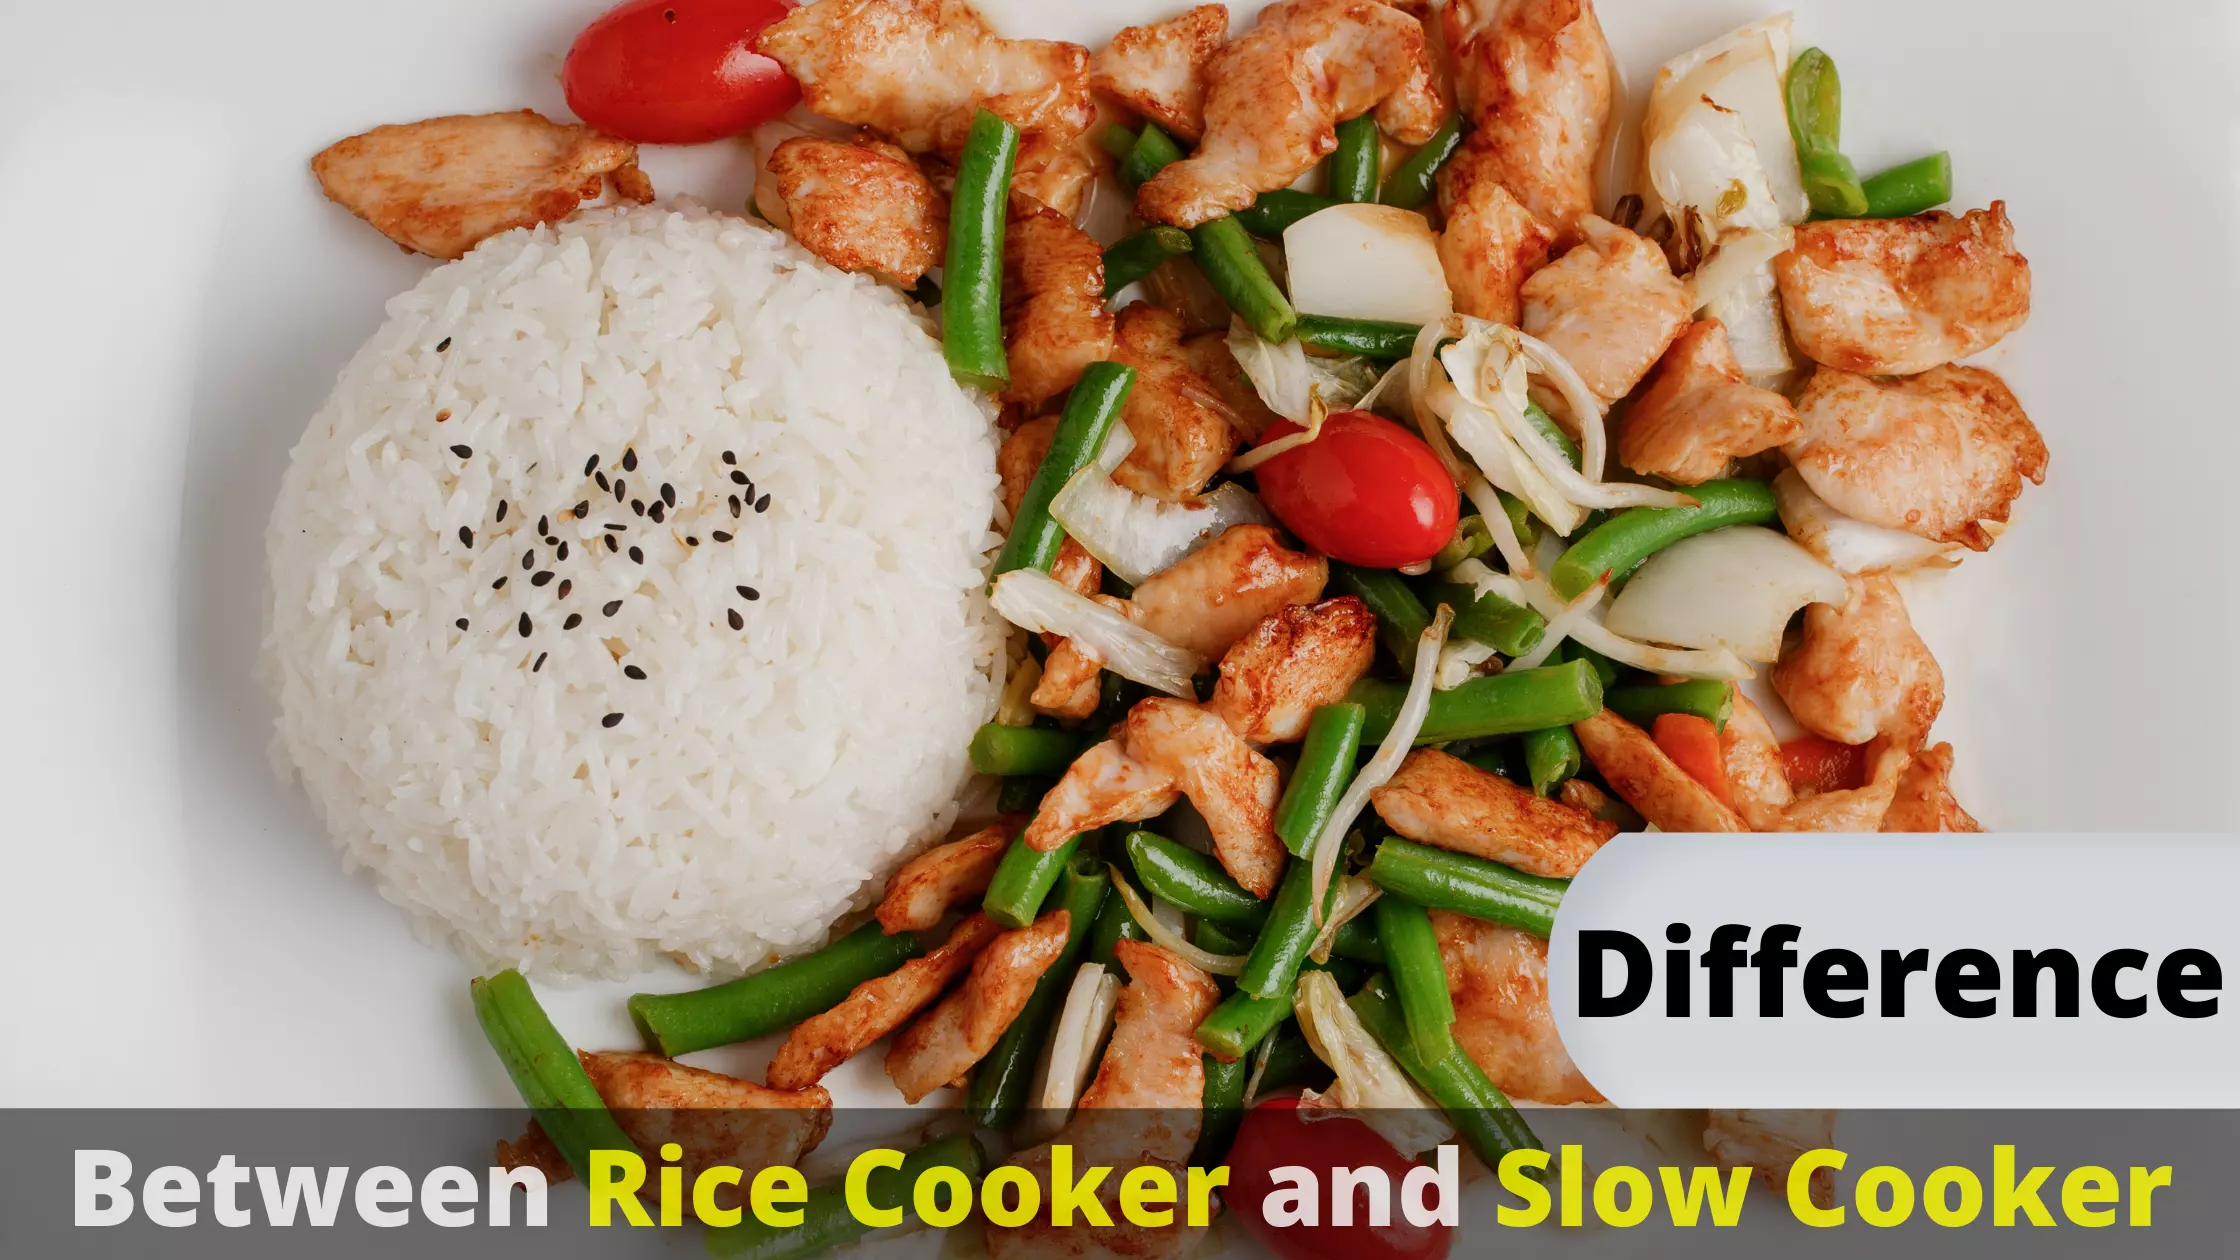 Difference between Rice Cooker and Slow Cooker